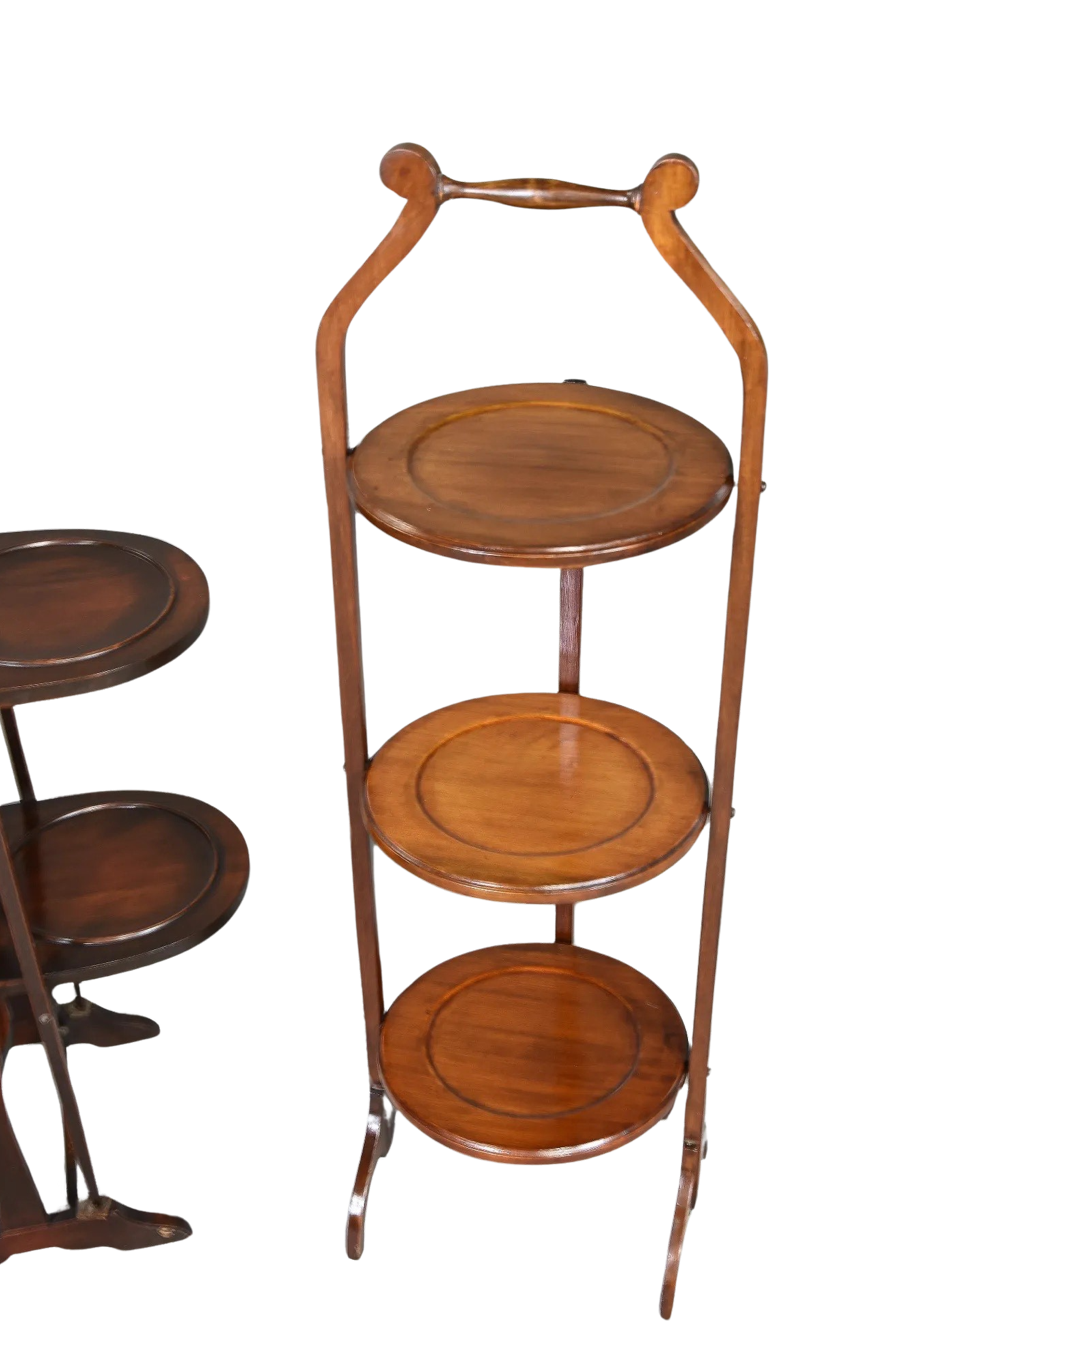 Antique English Pastry Stands